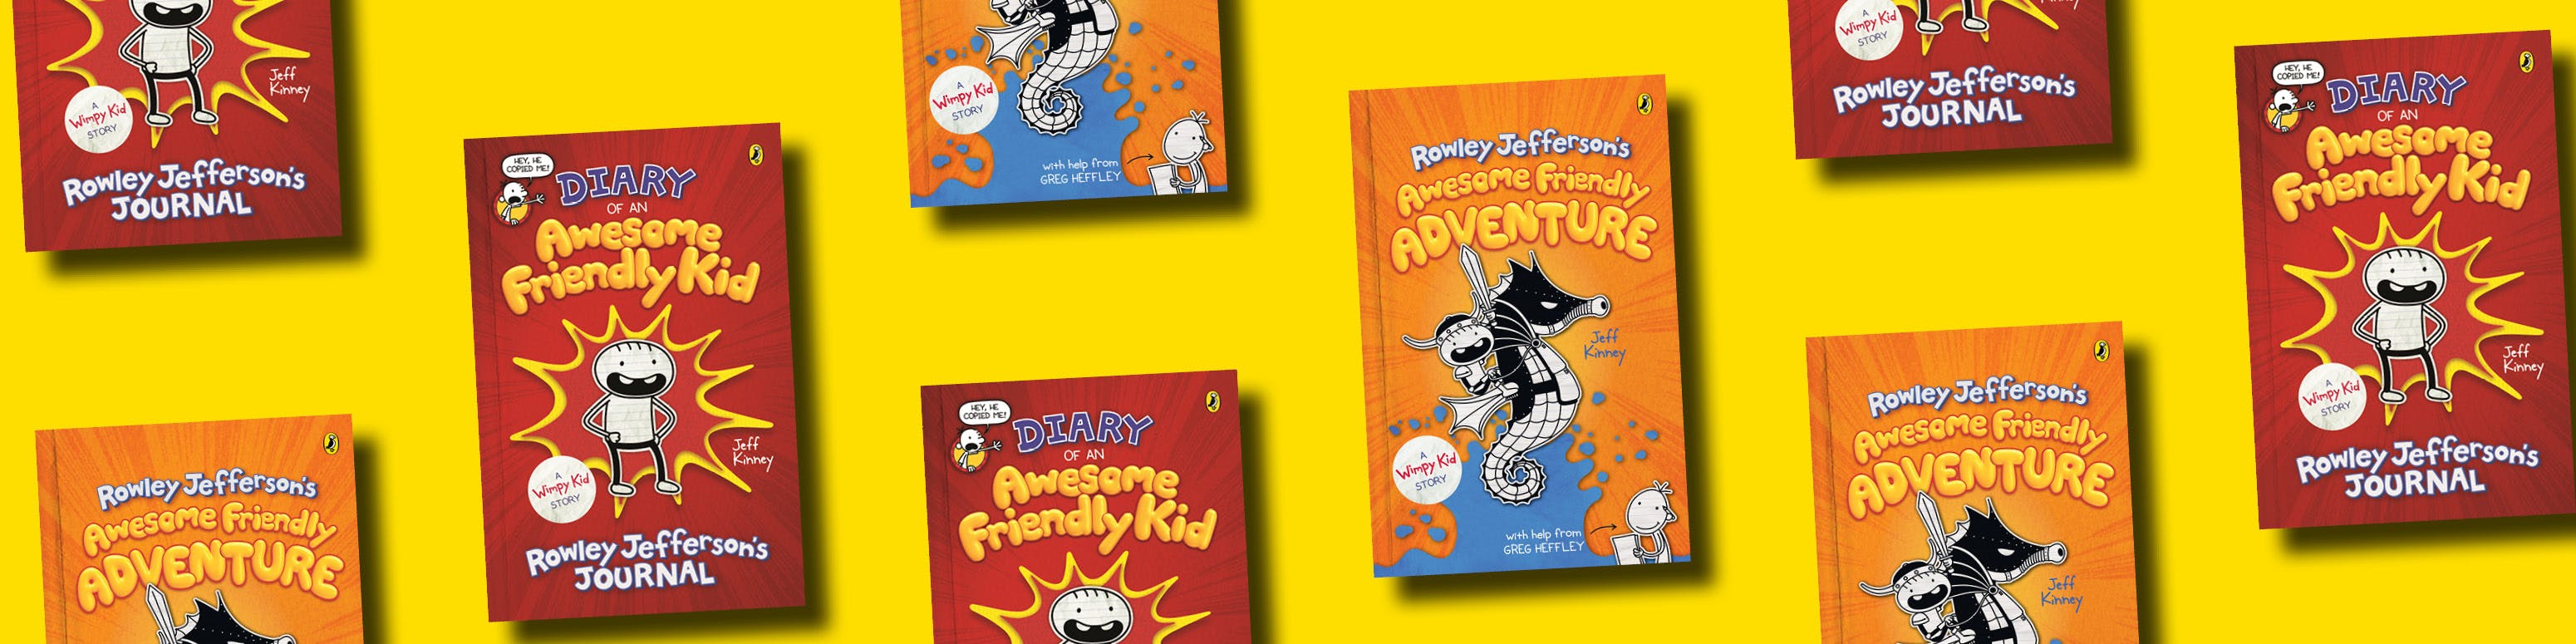 6 incredible book series to get your 7-year-old hooked on reading - Penguin  Books Australia